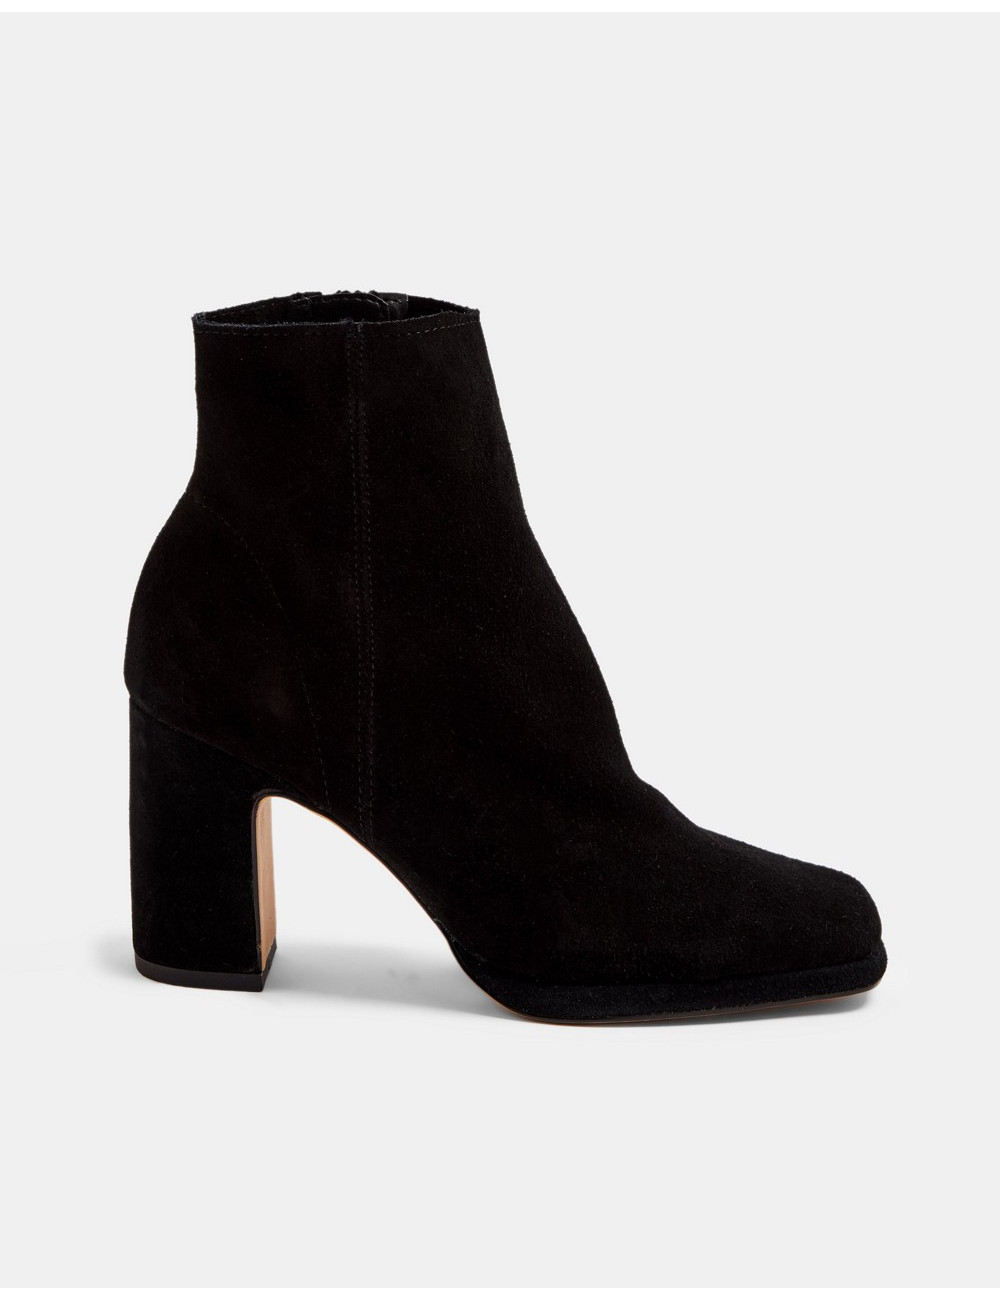 Topshop suede boots in black